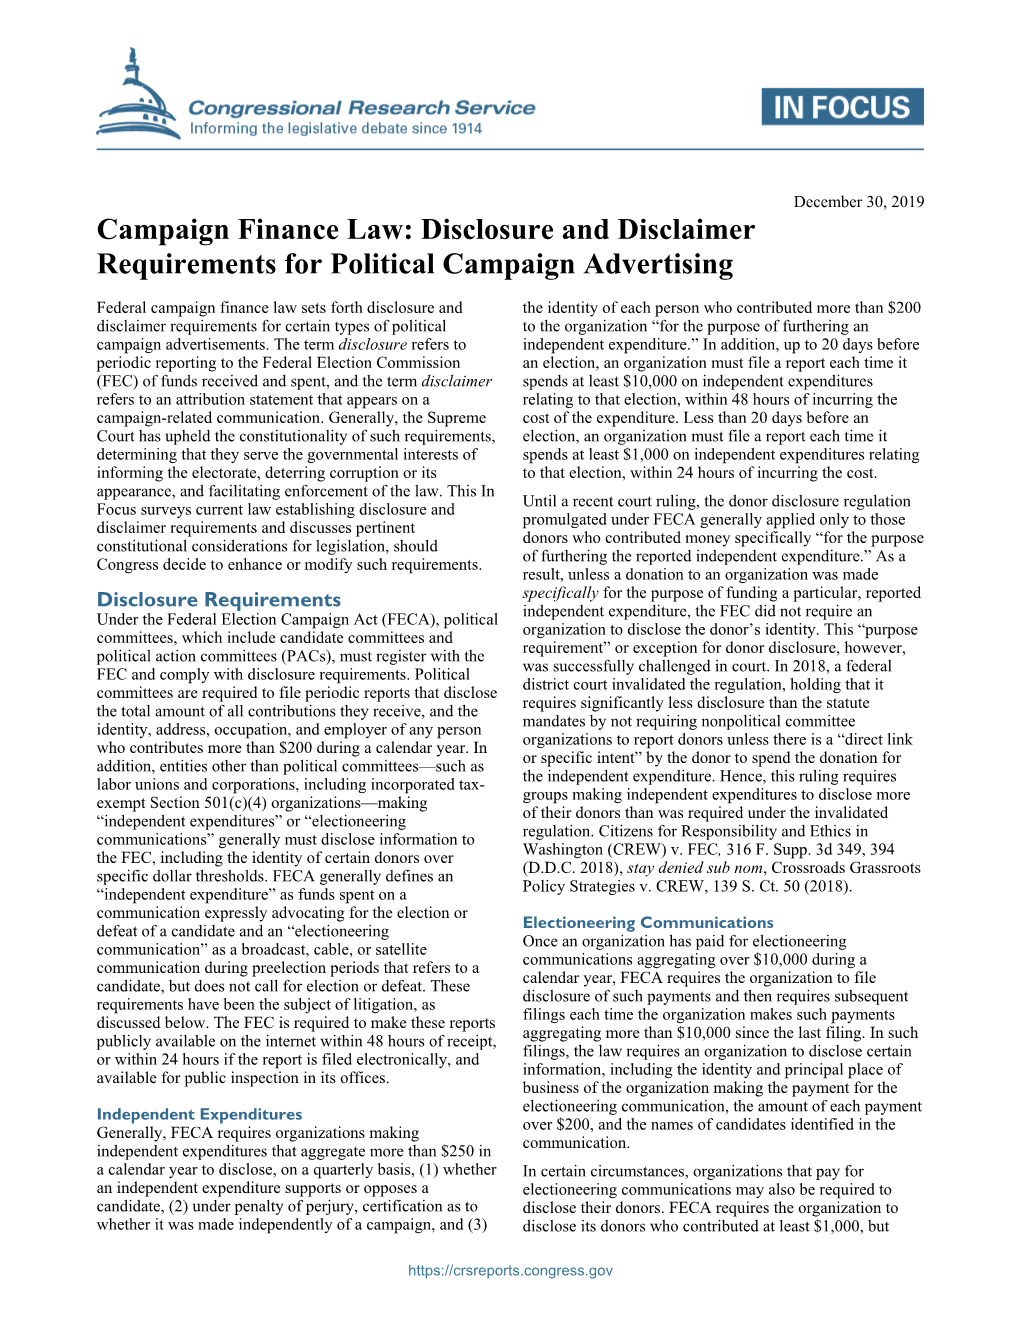 Campaign Finance Law: Disclosure and Disclaimer Requirements for Political Campaign Advertising